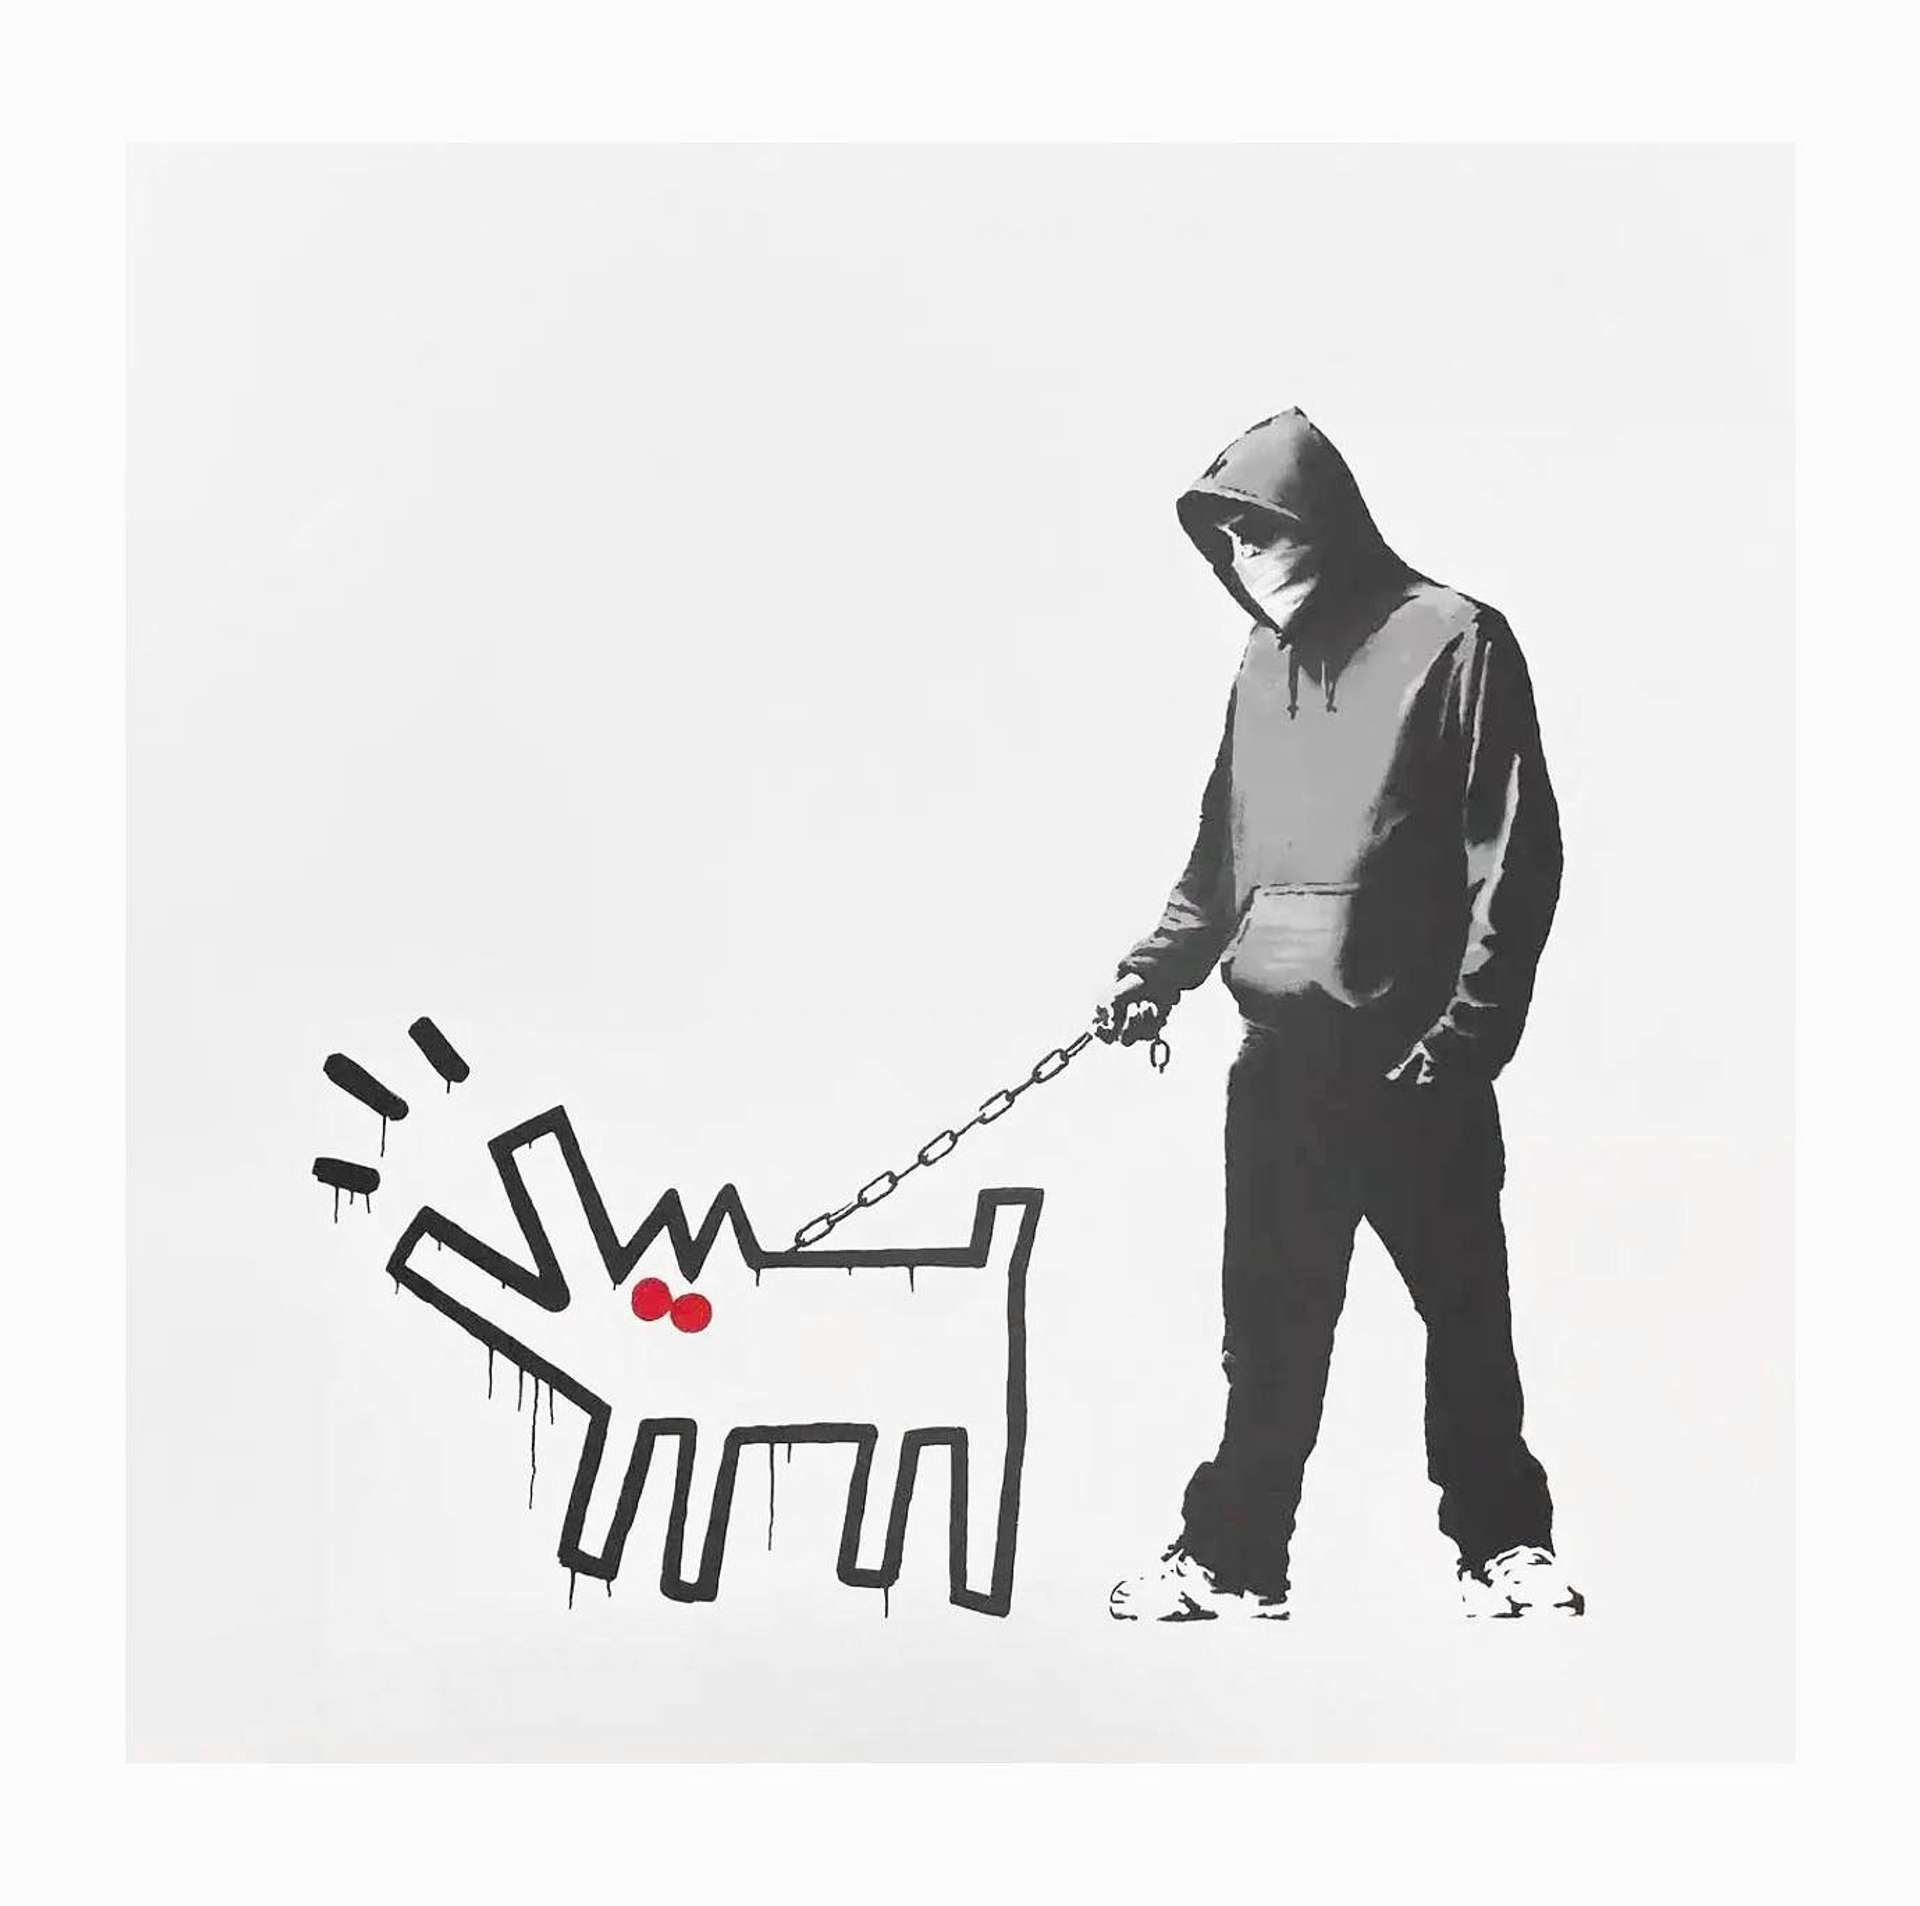 A black and white signed screenprint by Banksy depicting a hooded man holding the lead of a dog, which is inspired by Keith Haring's Barking Dog and had red spray painted eyes.